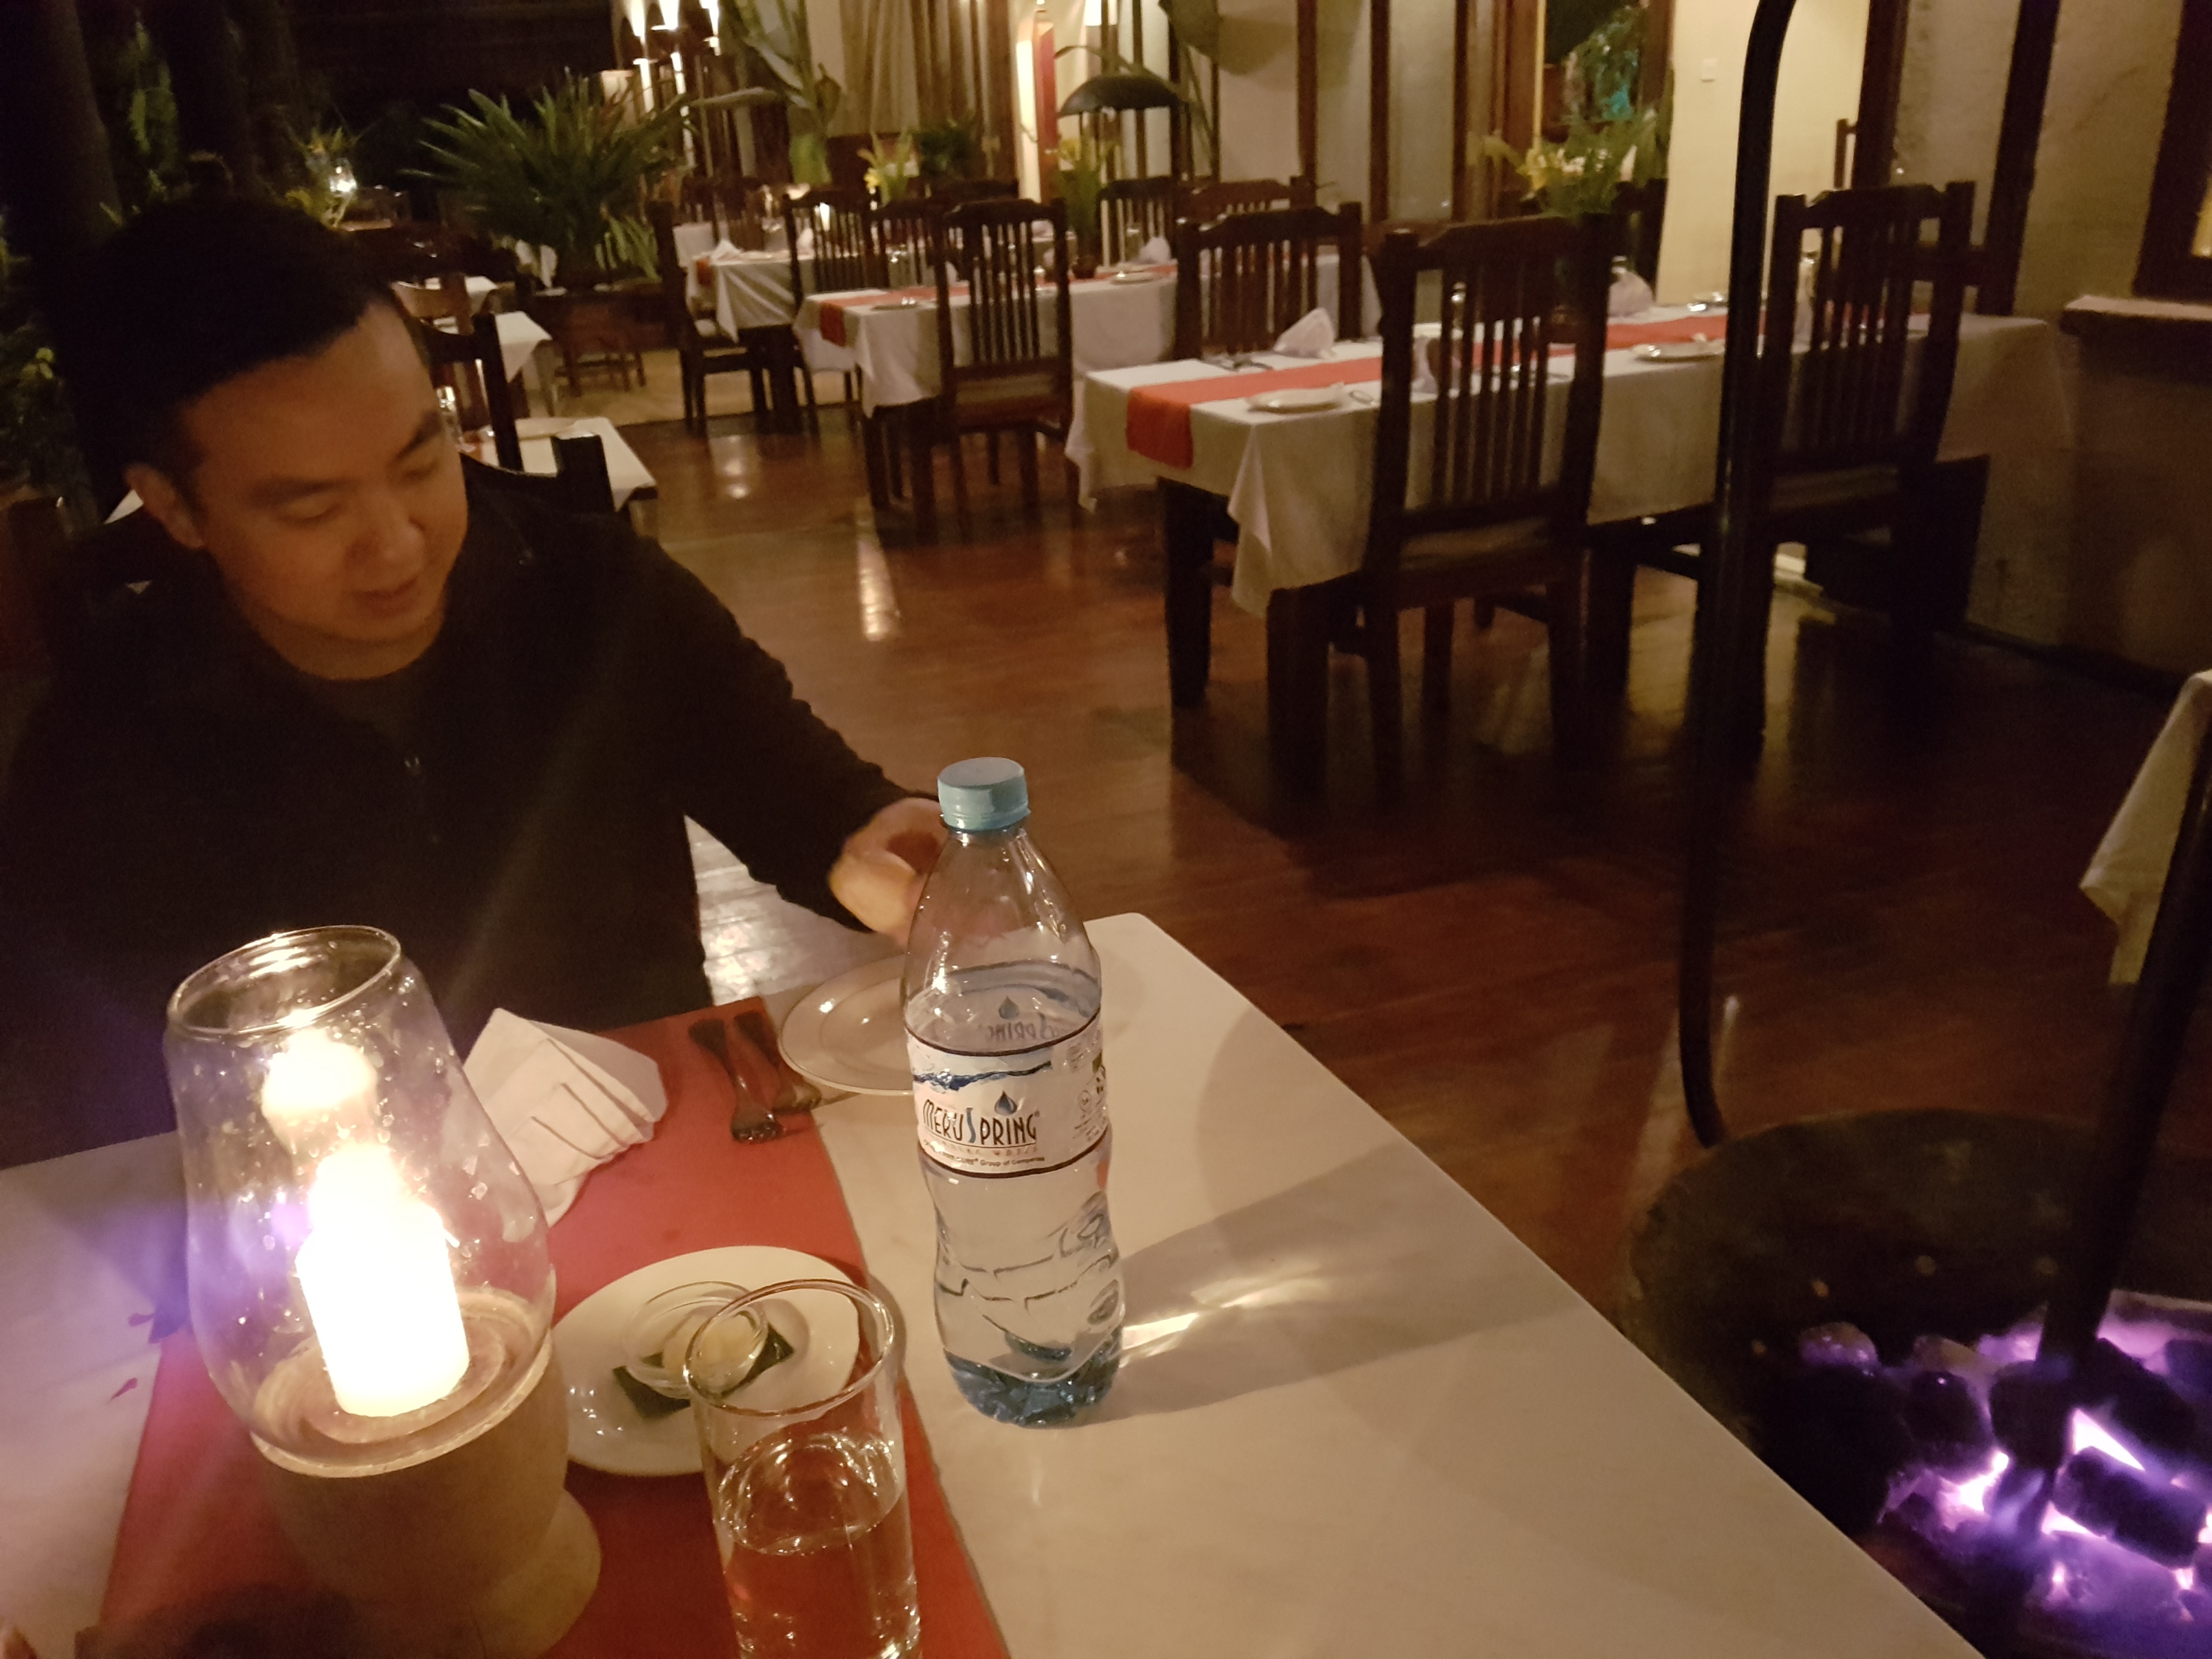 Dinner at Moivaro Lodge in Arusha while on Shadows of Africa safari